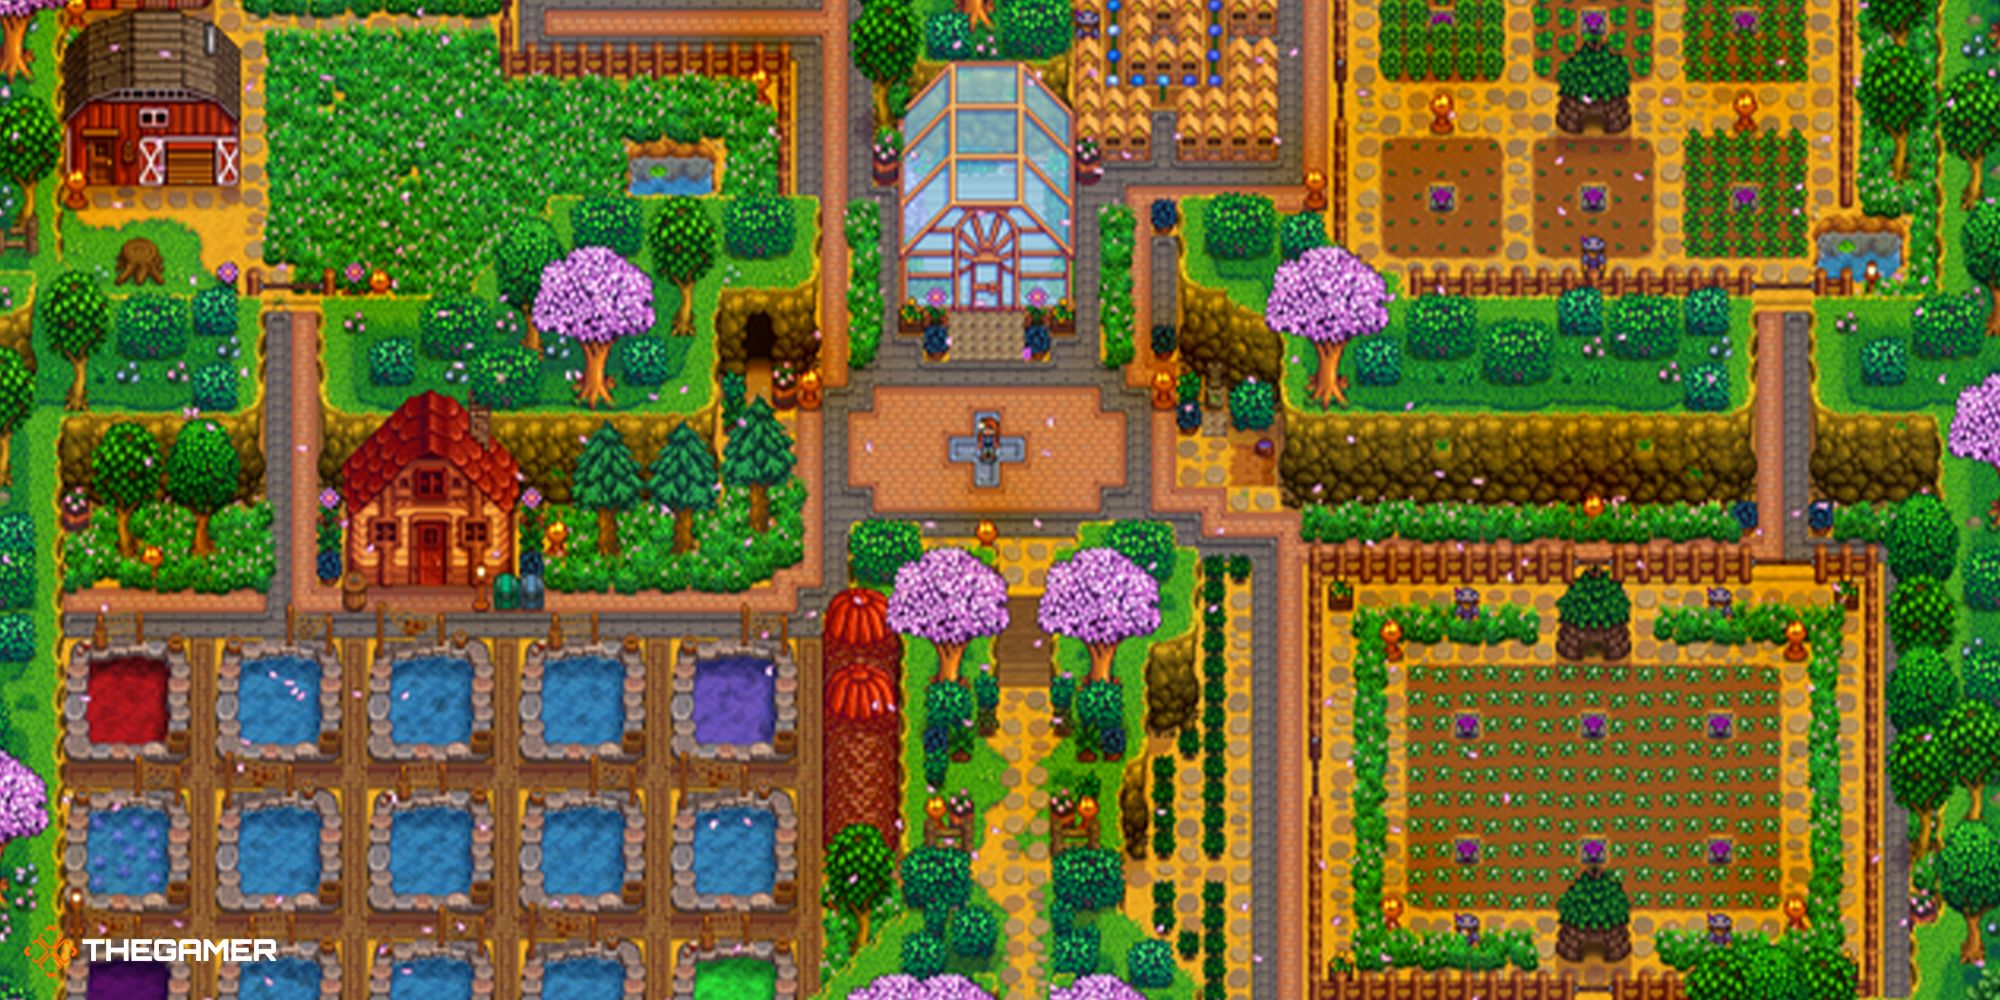 A fully-populated Four Corners Farm in Stardew Valley with areas for crops, ponds, animals, and beehives